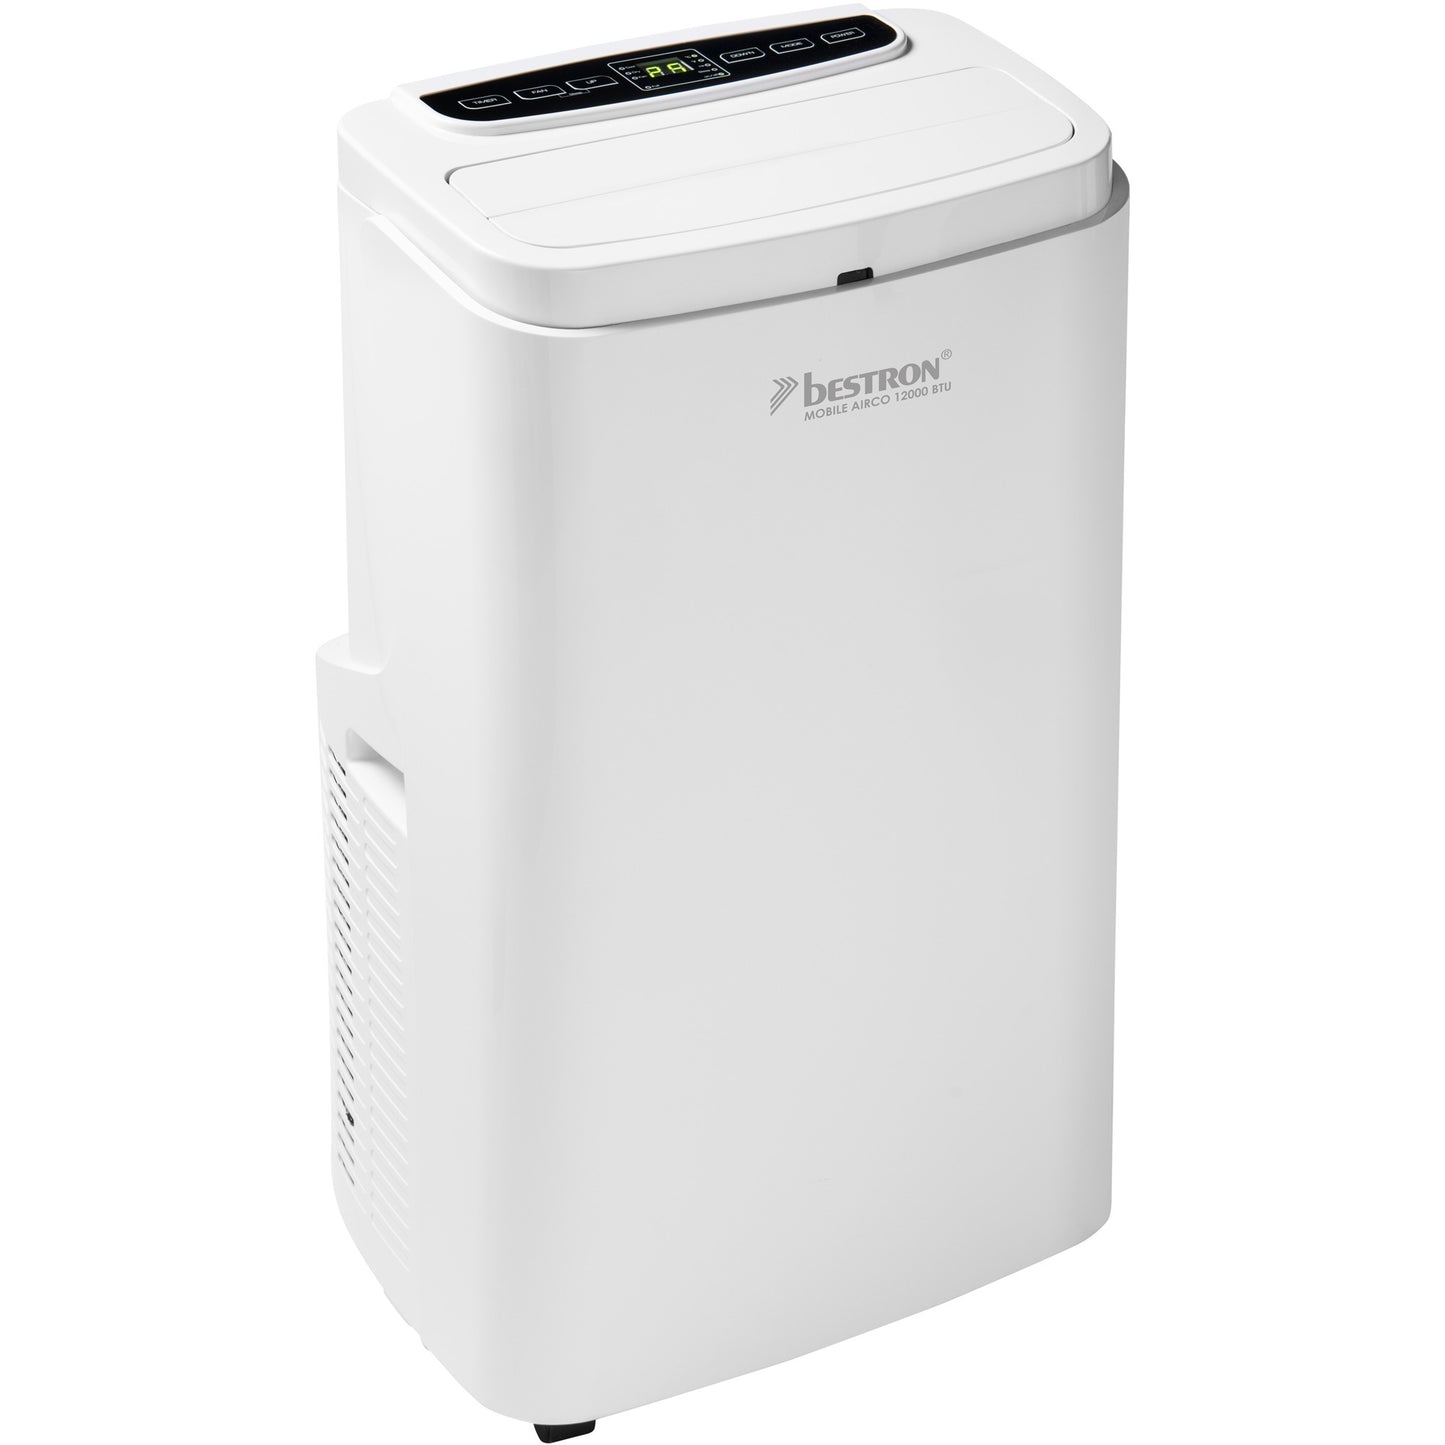 Bestron AAC12000 Mobiele Airconditioner